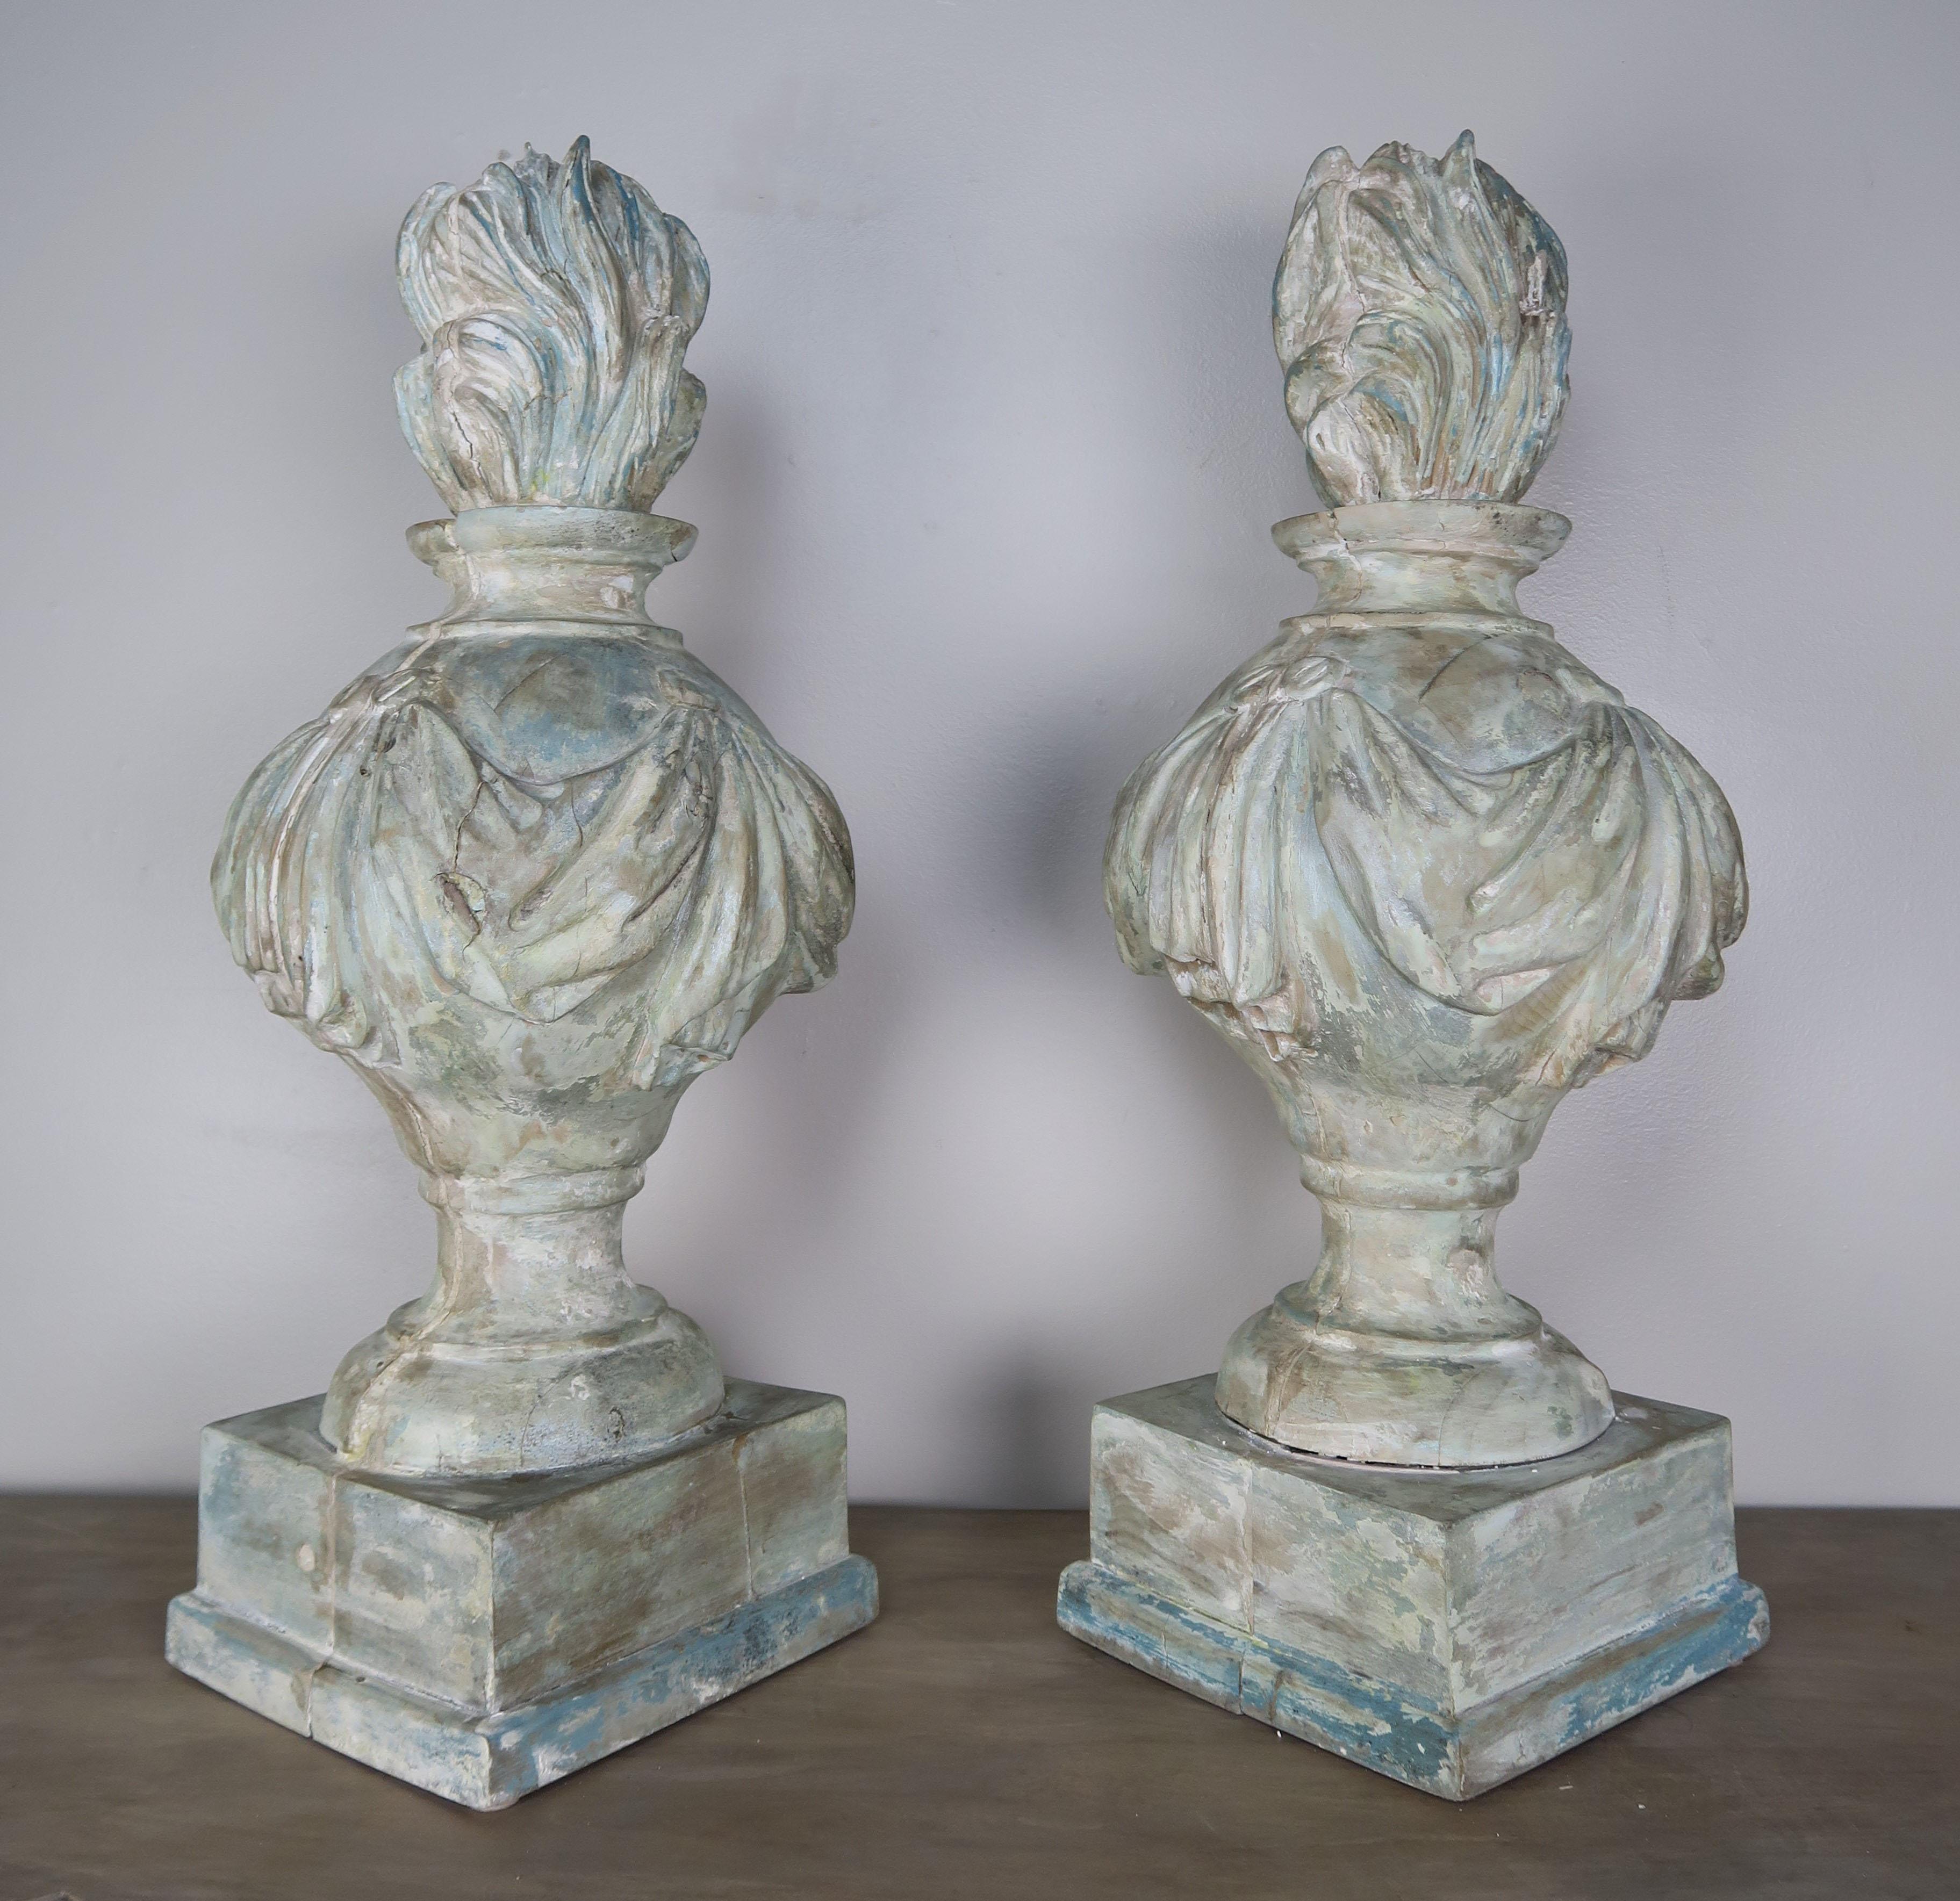 Pair of 19th century carved wood painted flamed finials. They are perfect for lamps as well but we are selling the pair as decor.